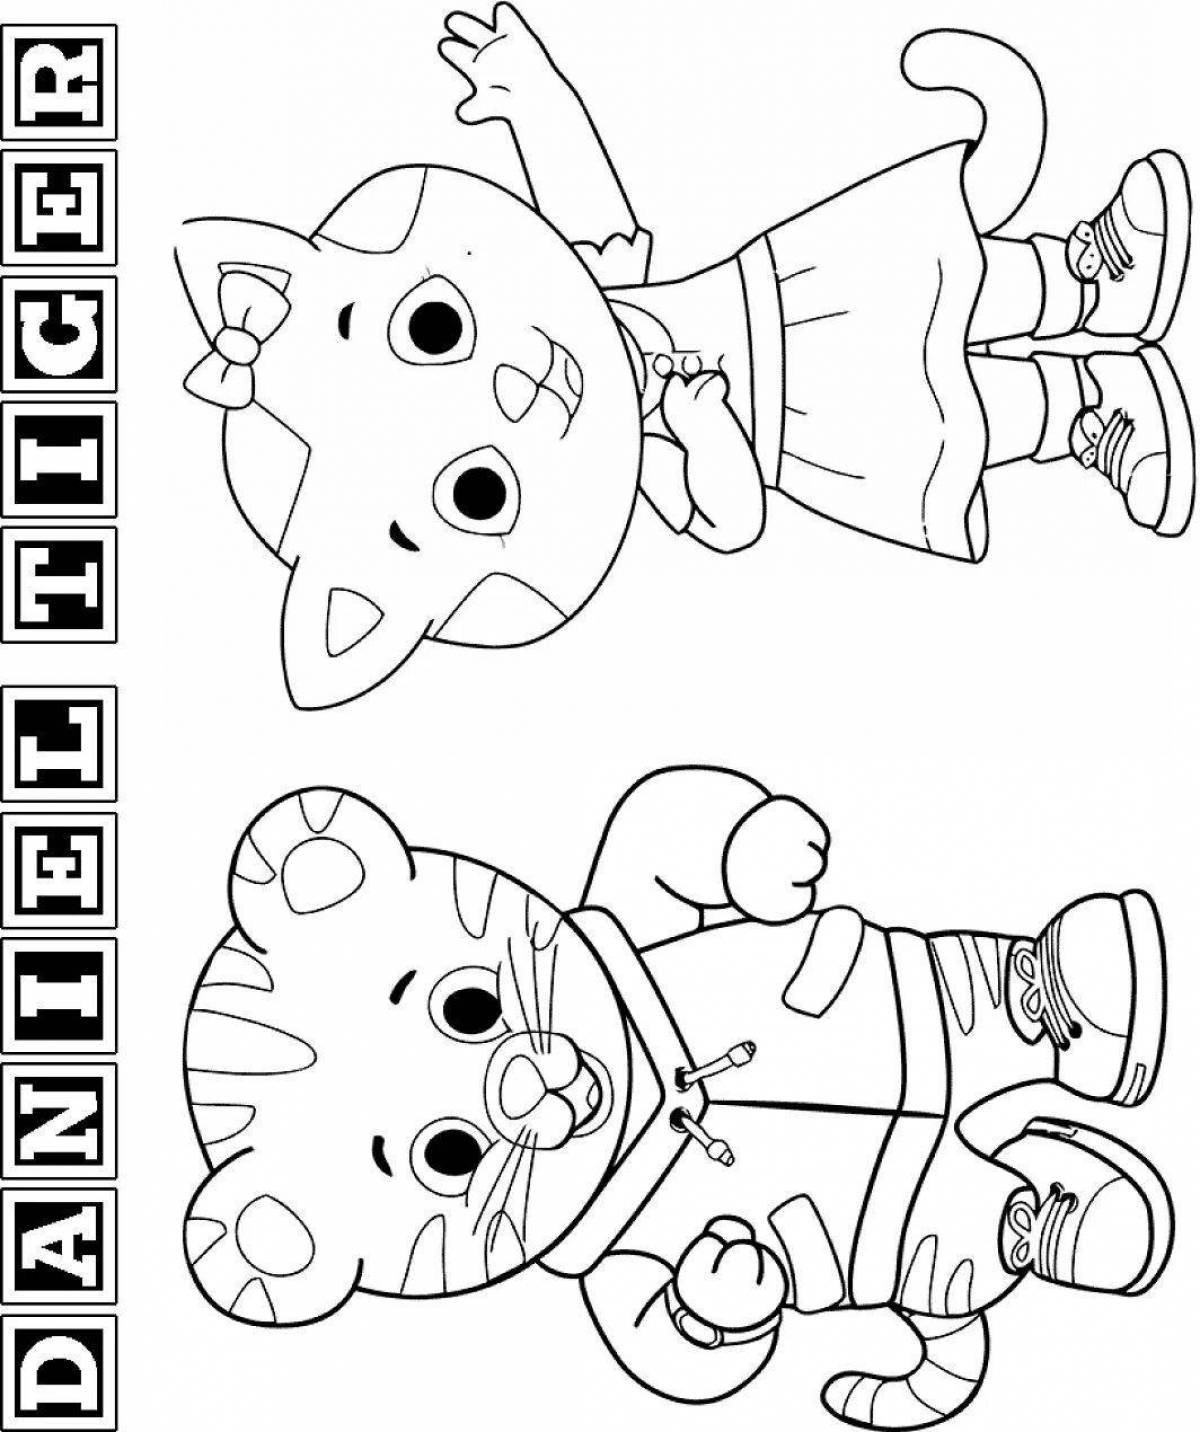 Color-mania coloring environment for kids